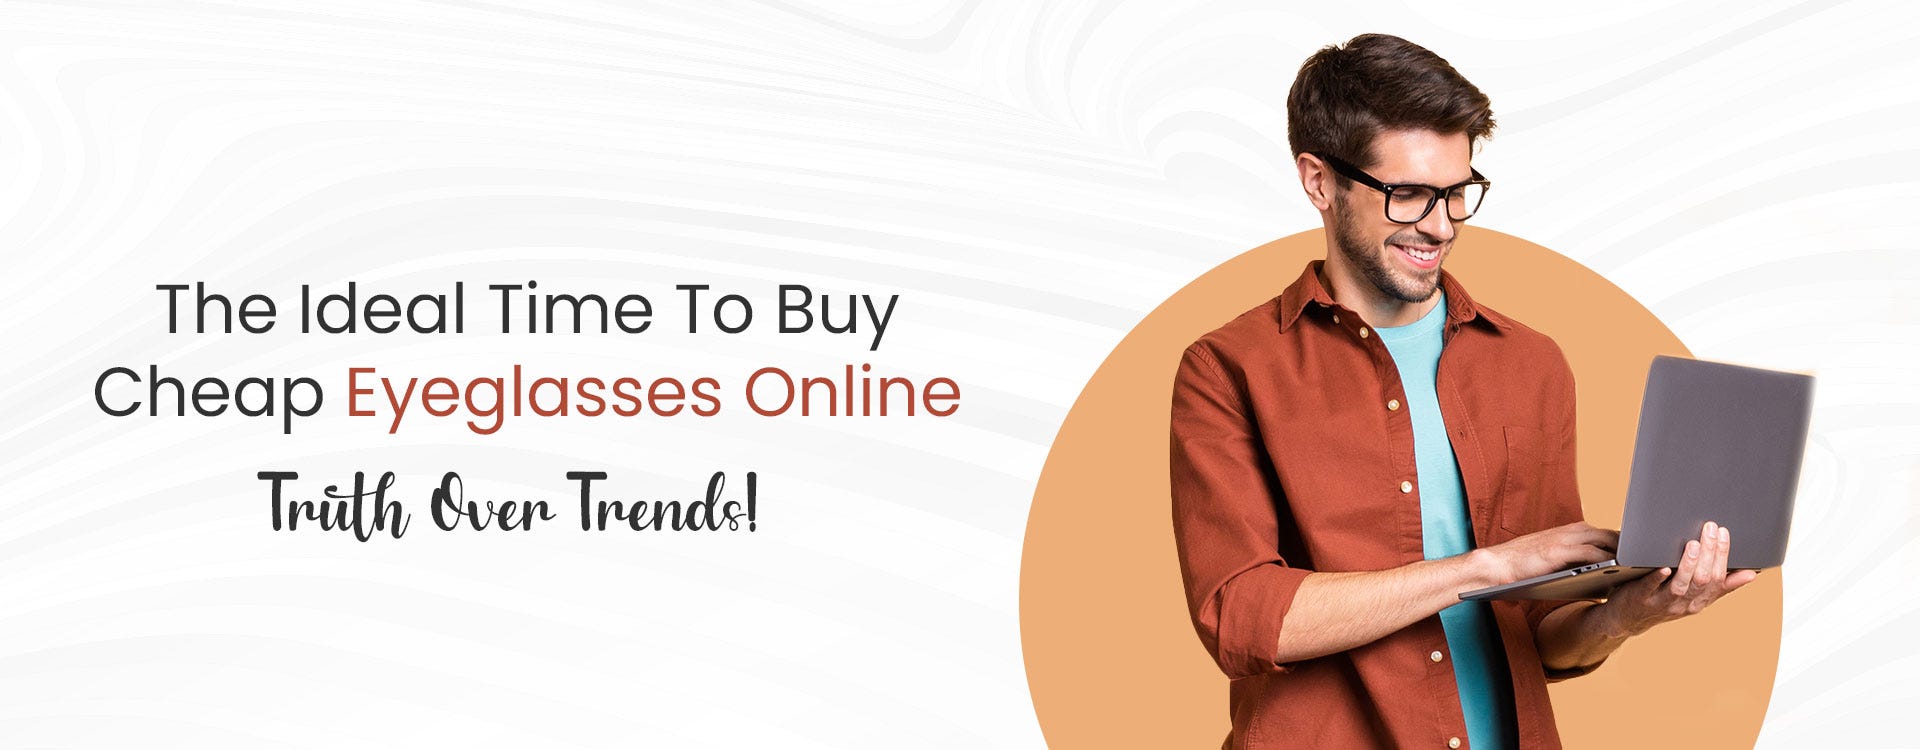 THE IDEAL TIME TO BUY CHEAP EYEGLASSES ONLINE - TRUTH OVER TRENDS!